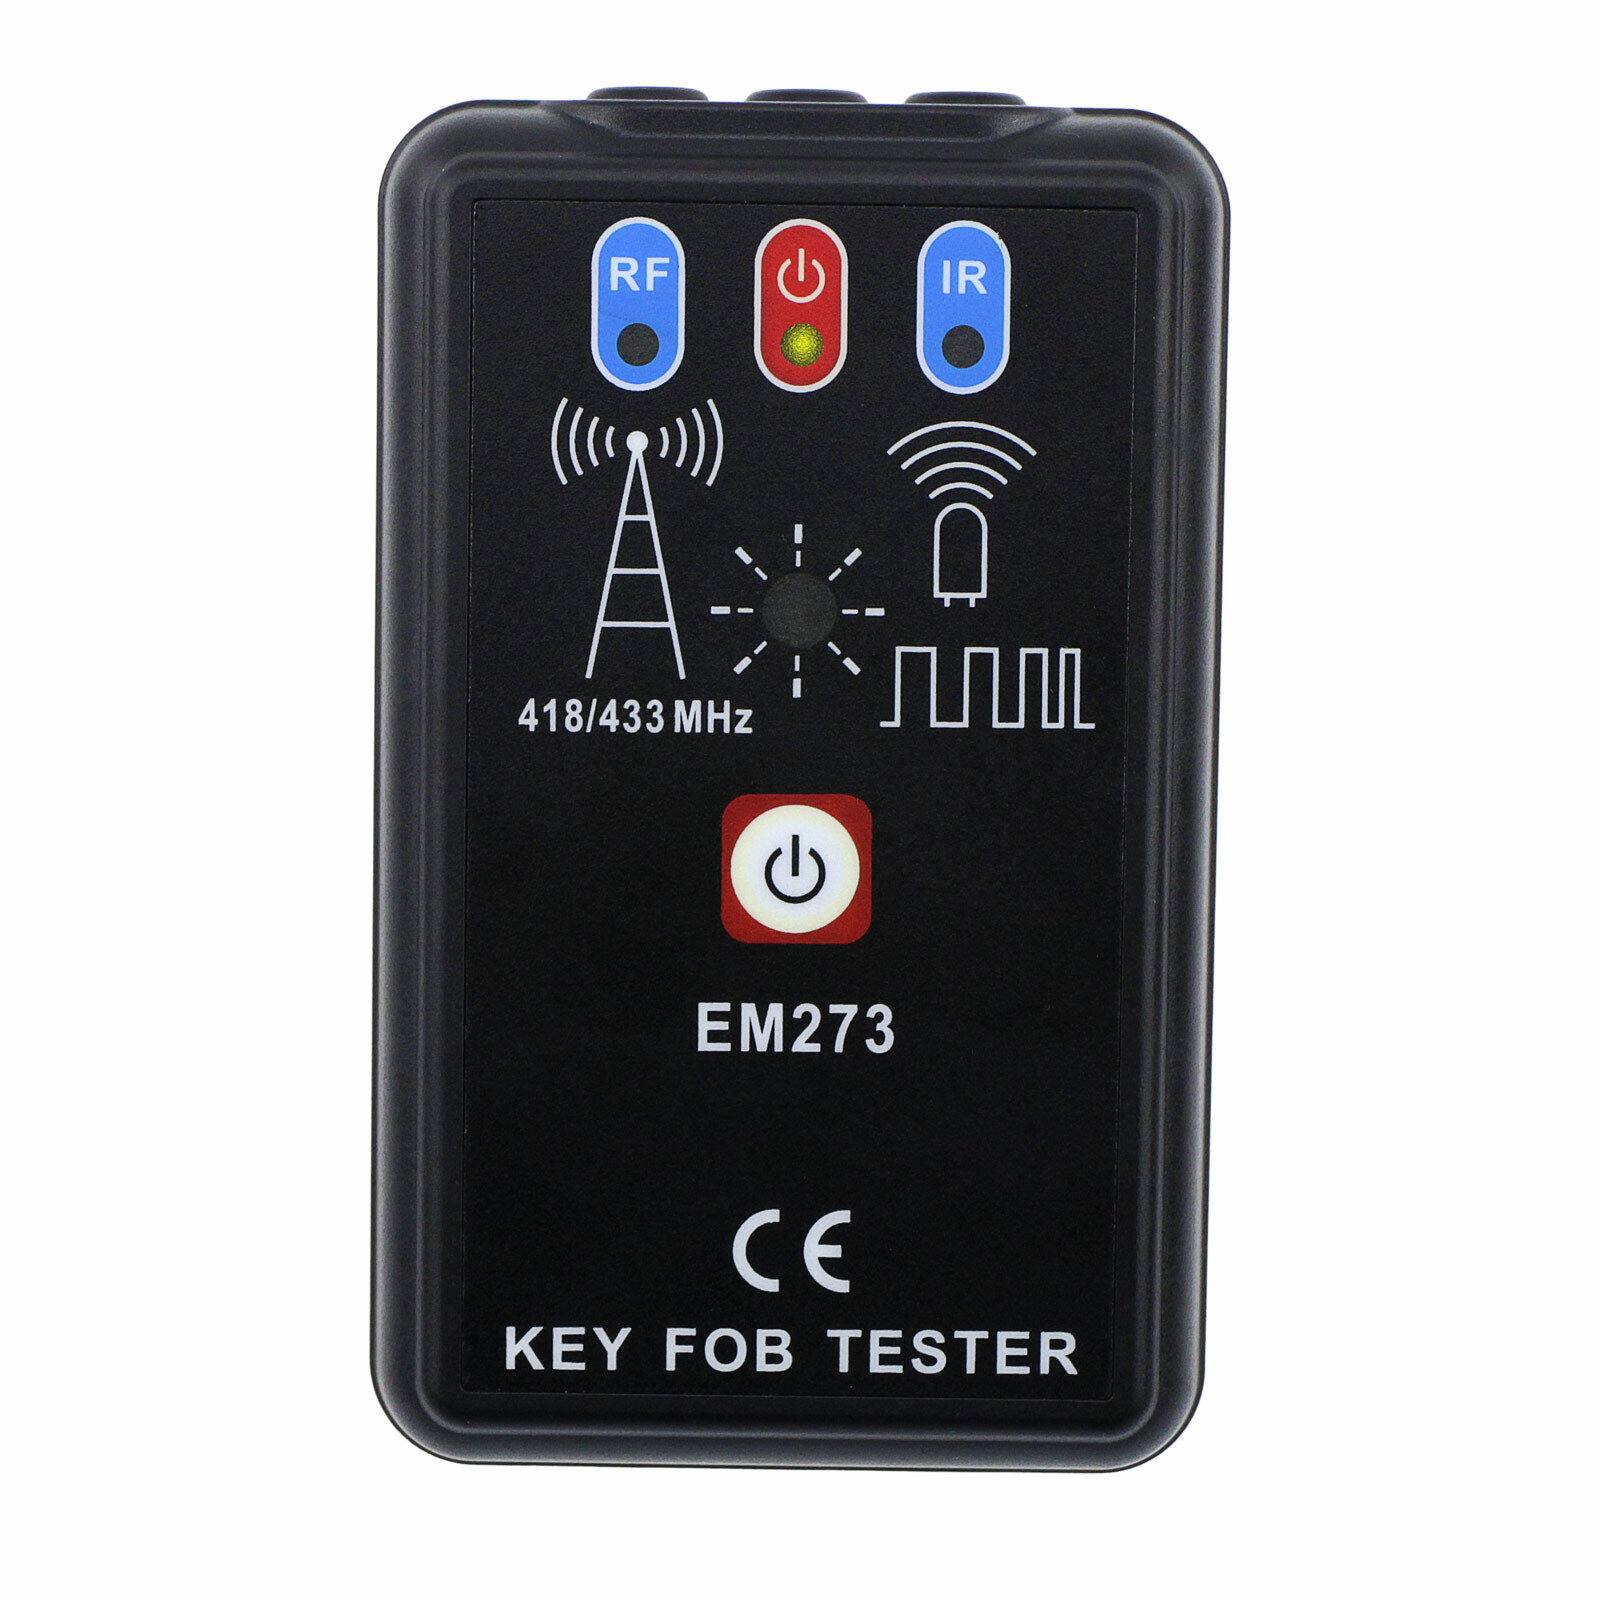 Portable Infrared&Radio Frequency Tester Remote Controls Key FOB Tester US Ship